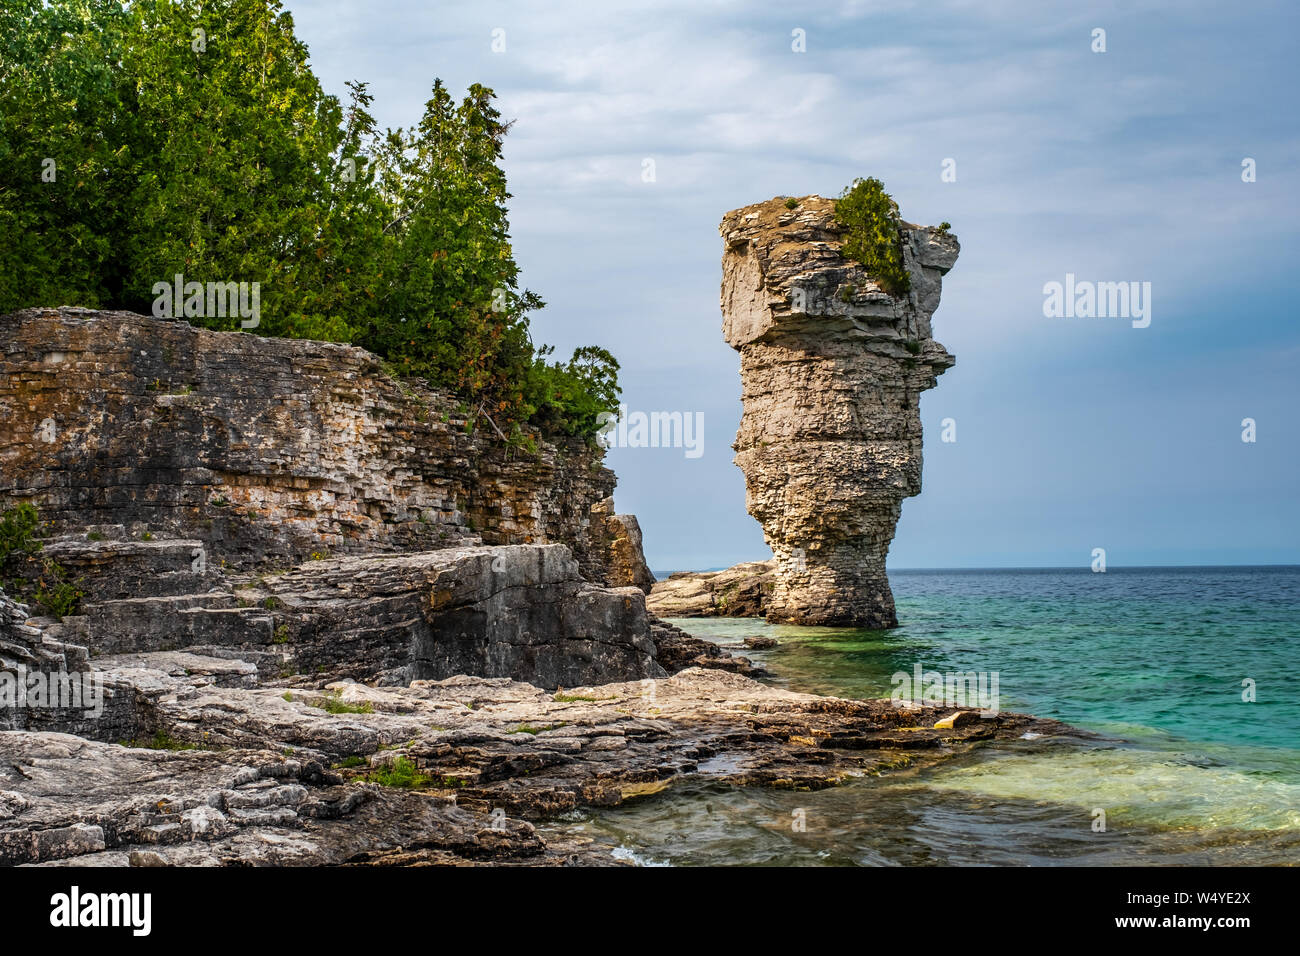 On Flowerpot island in Fathom Five National Marine Park, one of the two rock pillars or sea stacks, rise from the waters of Georgian Bay. Stock Photo